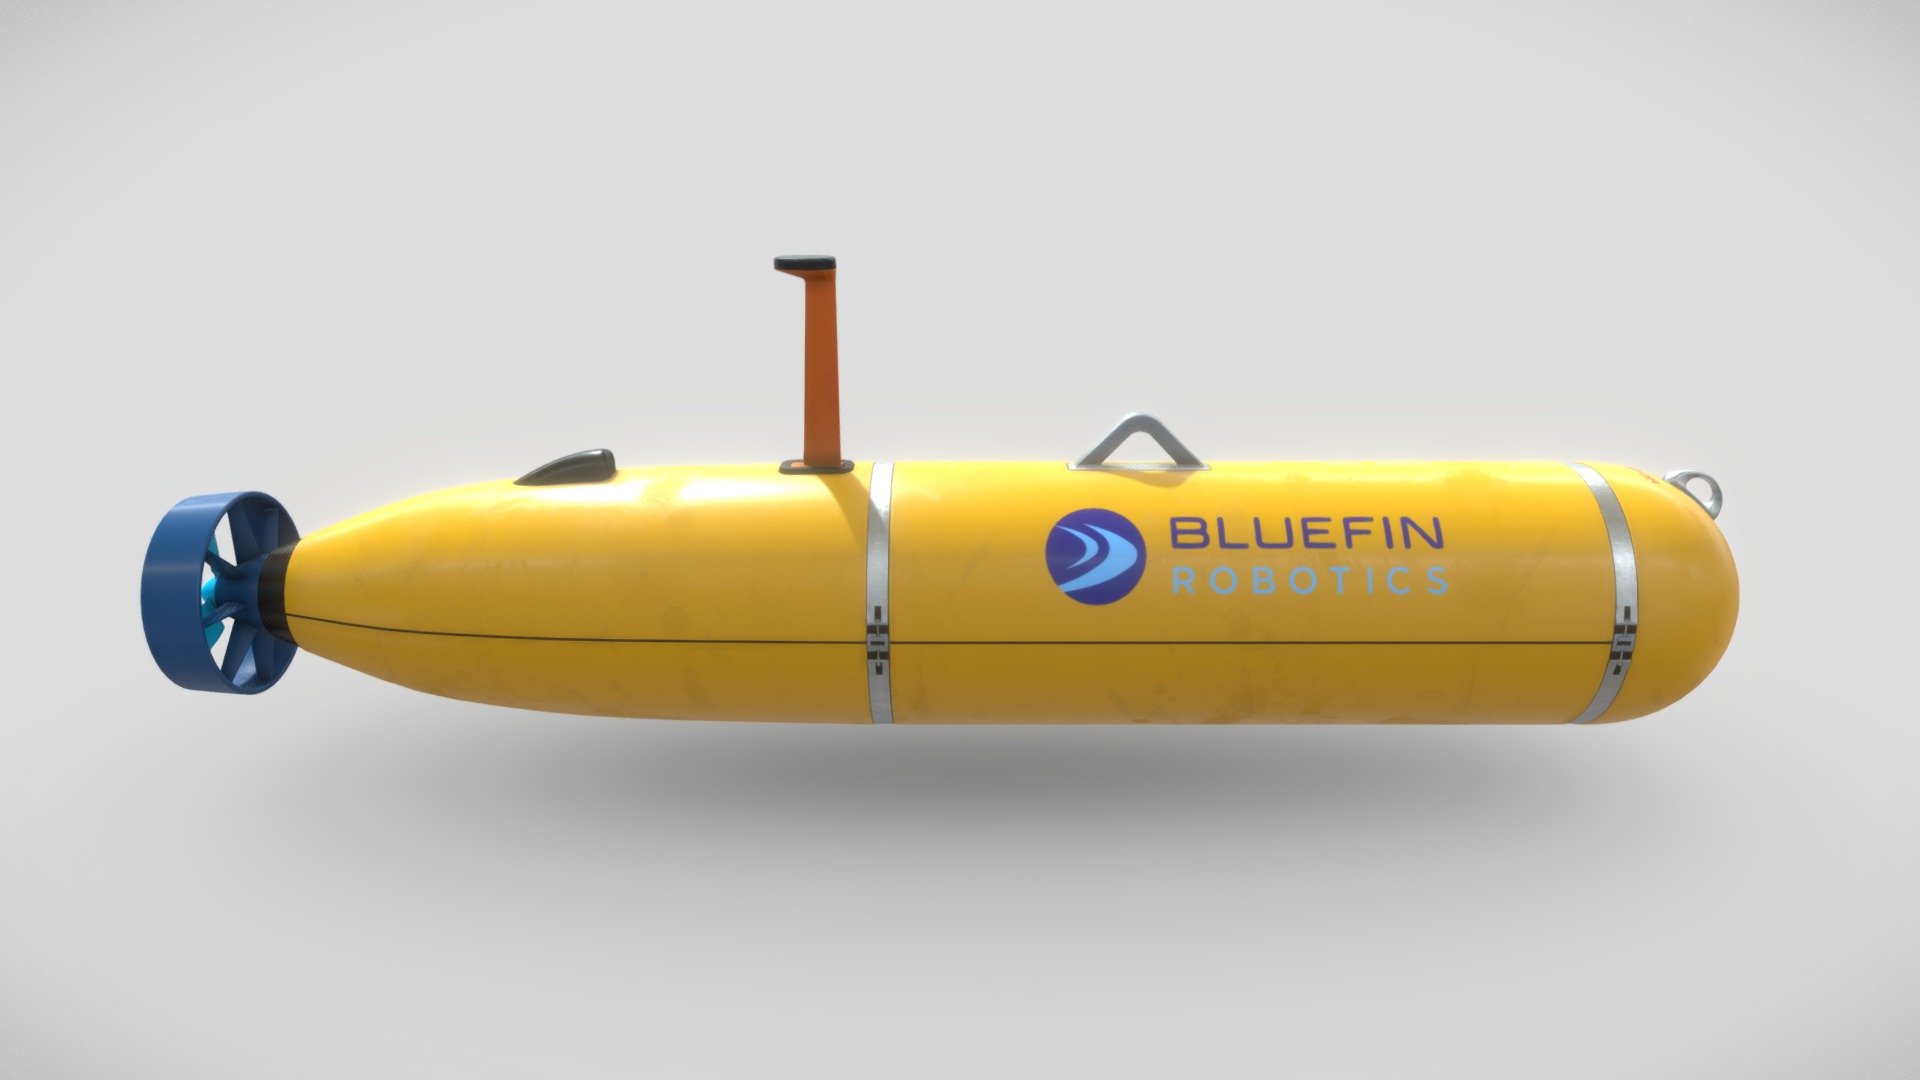 The Bluefin 21 is a AUV developed by Bluefin Robotics (Aquired by General dynamics) 3d model